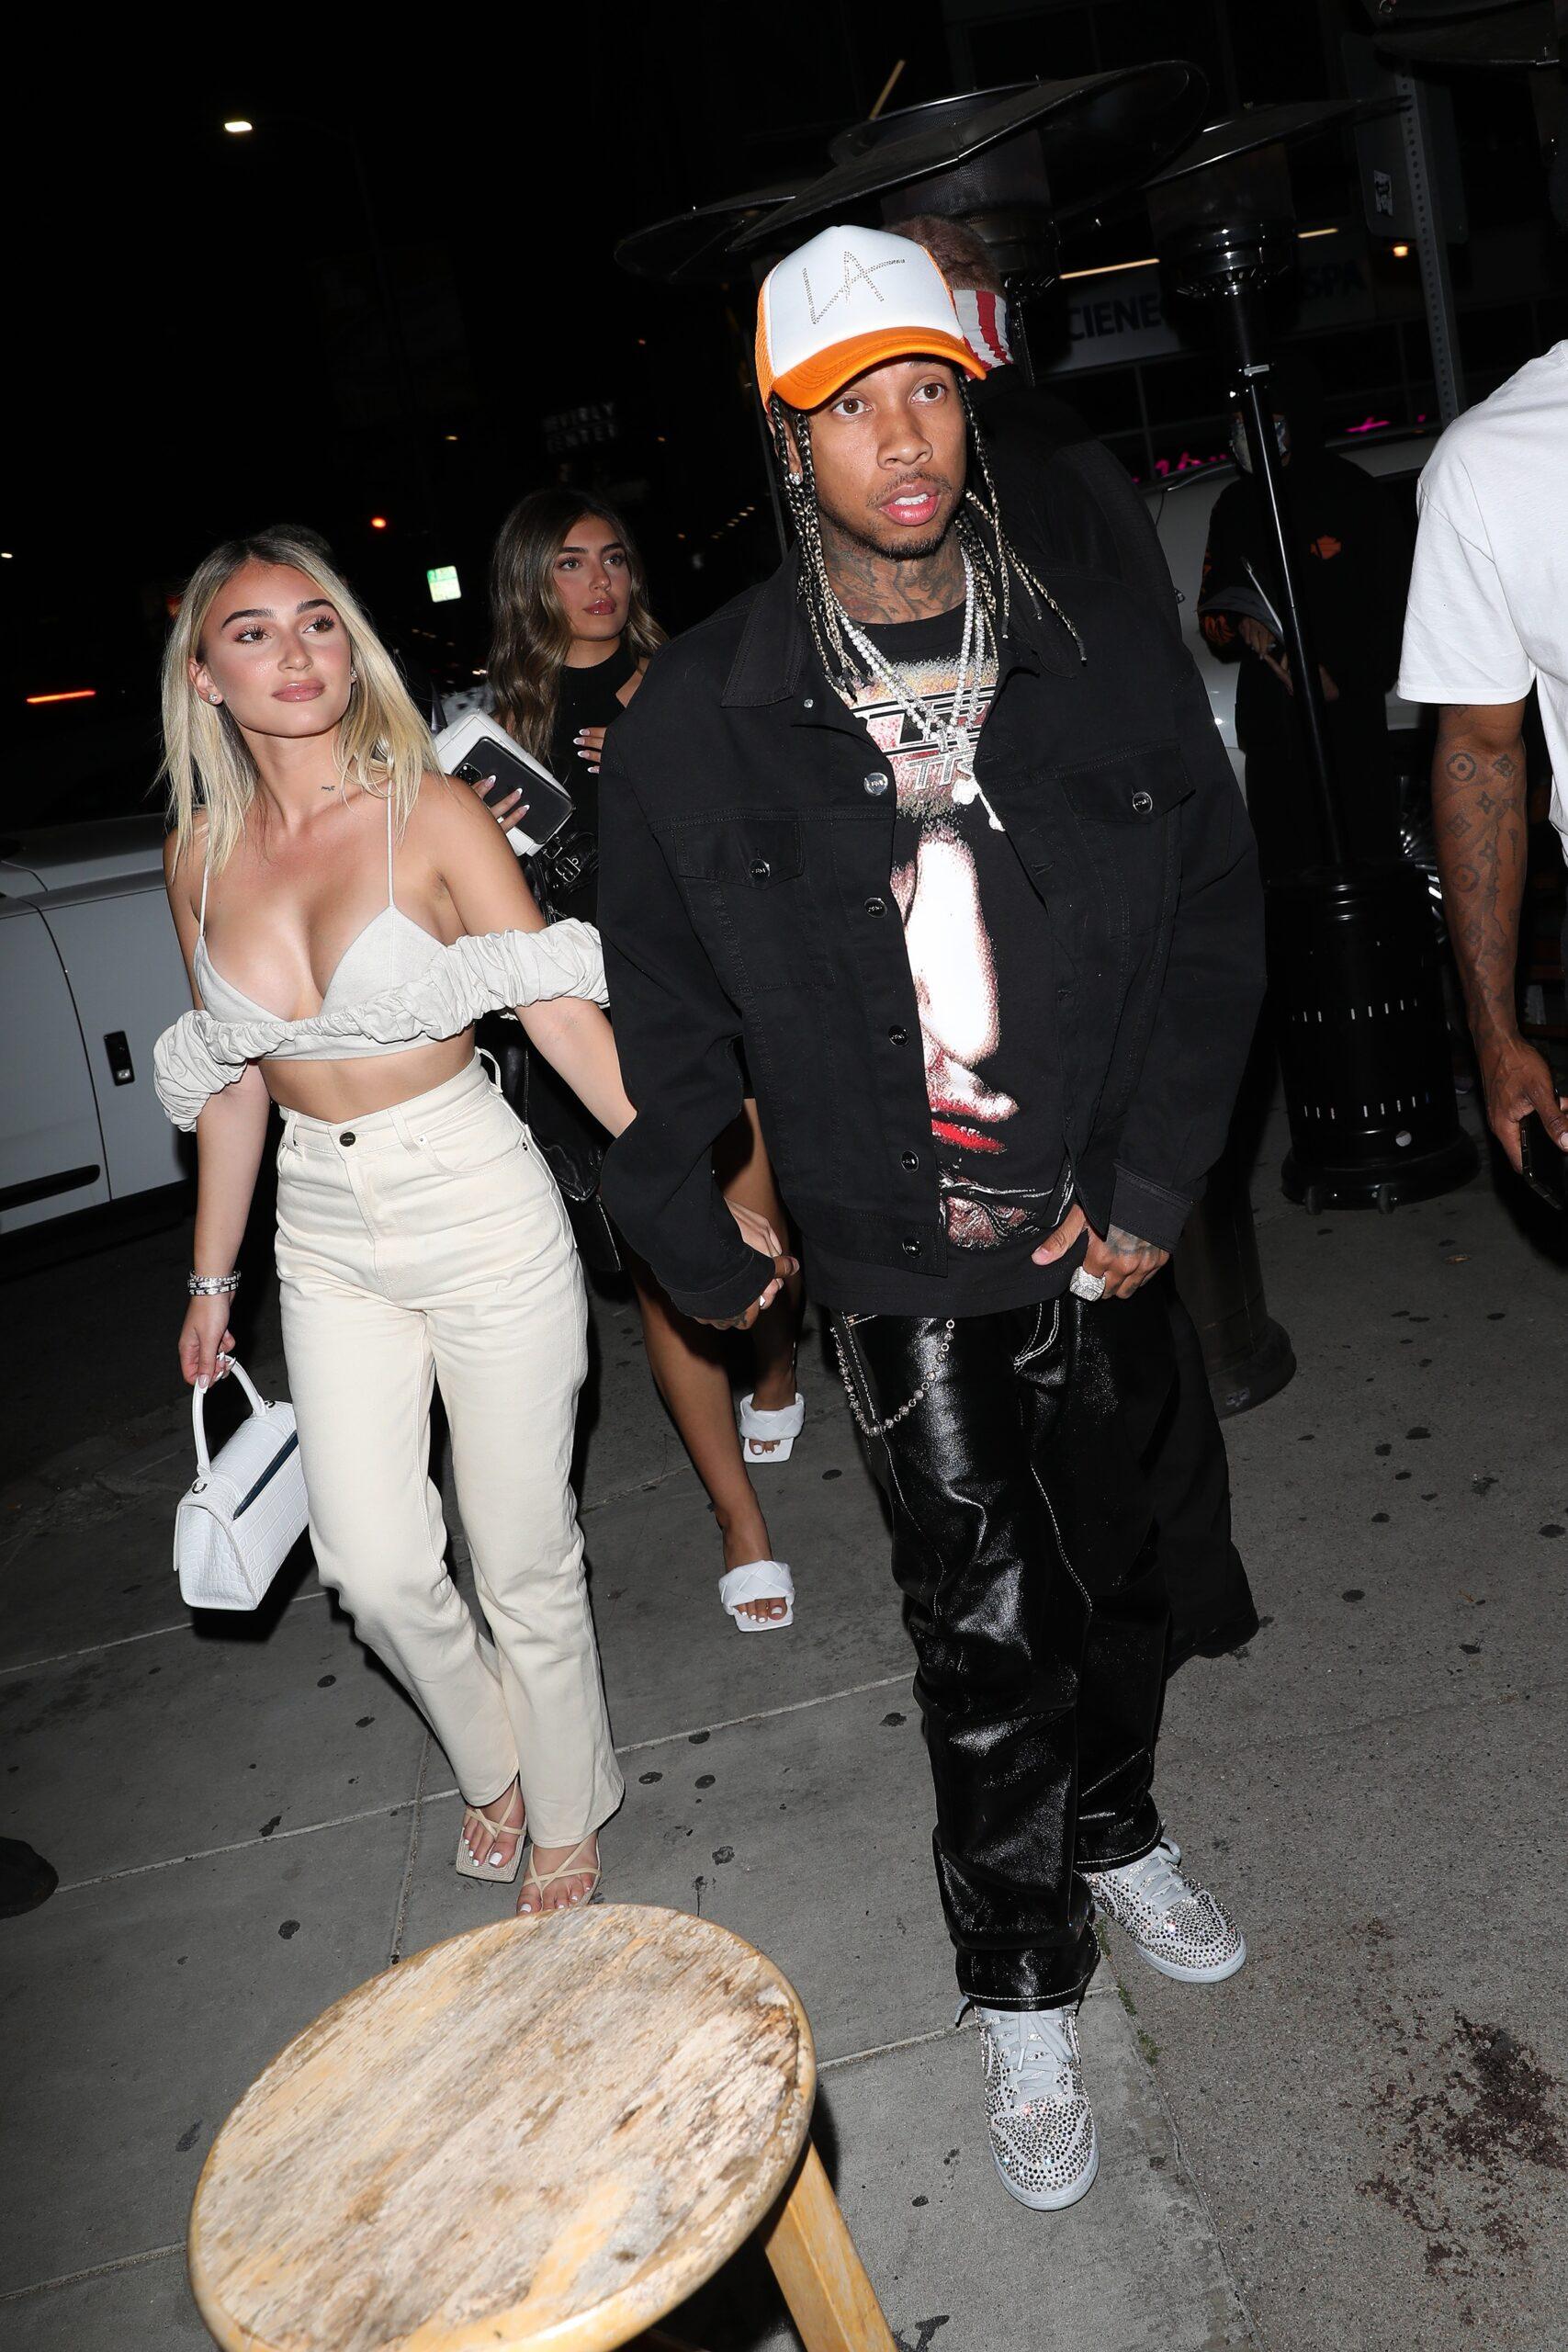 Rapper Tyga Turns Himself Into LAPD, After Ex-Girlfriend Shows Off Brutal Fight Photos